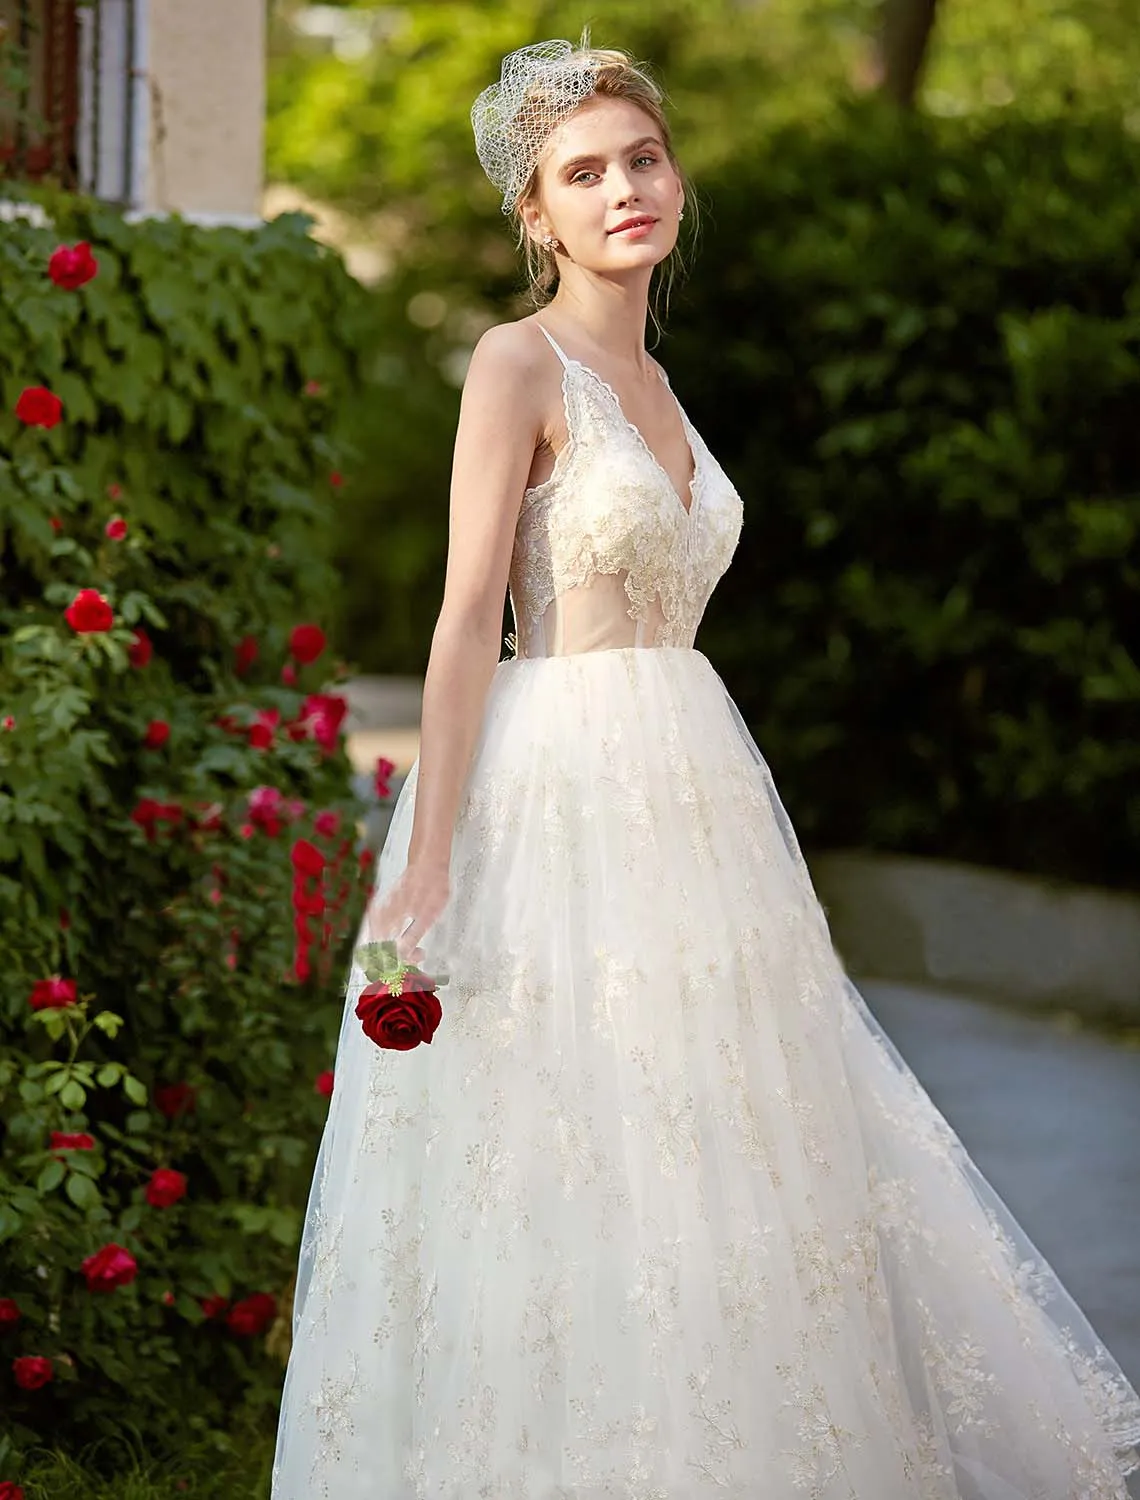 Beach Golden Lace Applique Wedding Dresses Sexy Illusion Wedding Gowns Backless Plus Size Long Bridal Dress